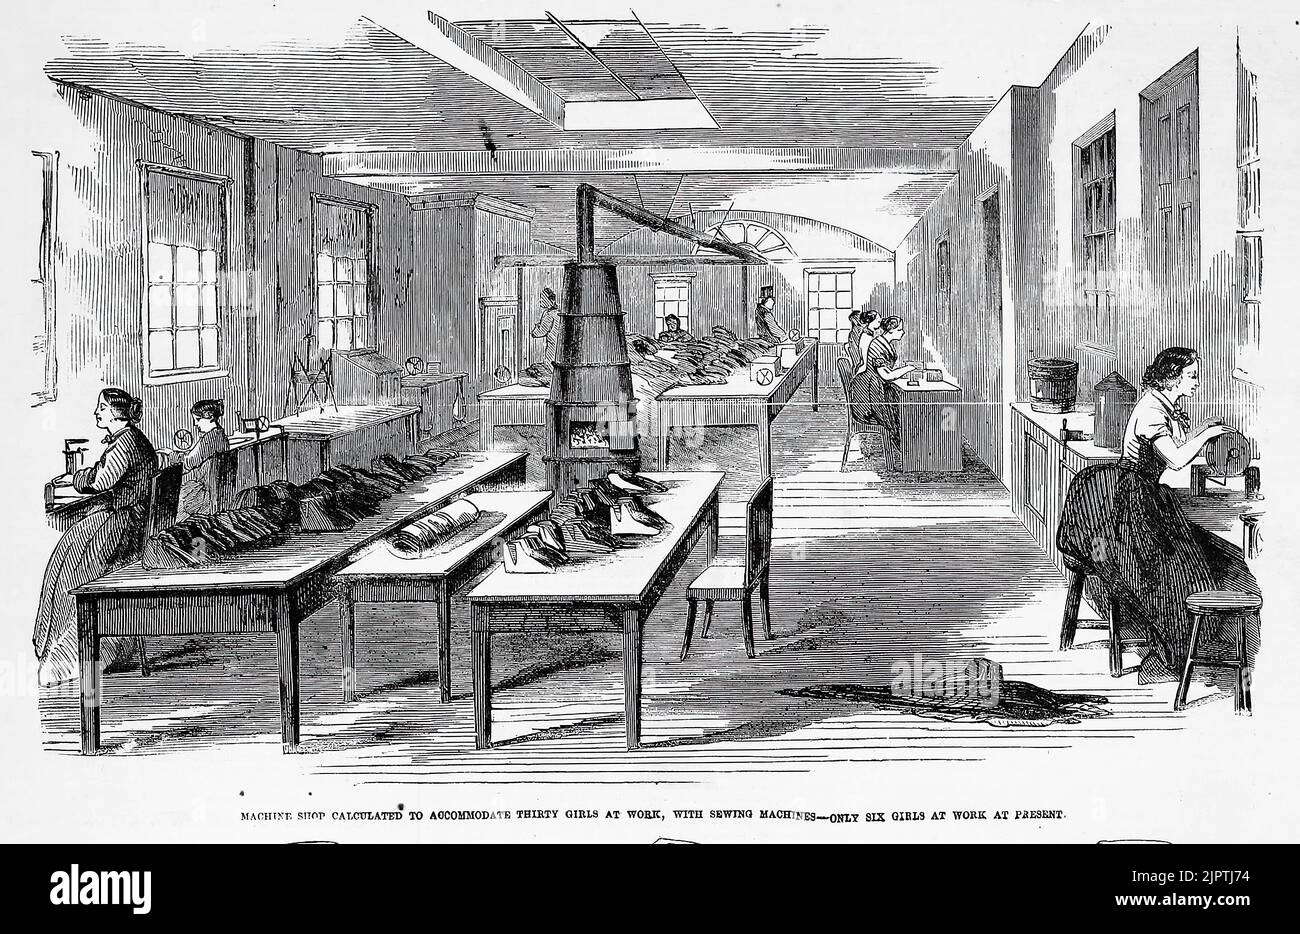 Machine shop calculated to accommodate thirty girls at work, with sewing machines - Only six girls at work at present. Lynn, Massachusetts. New England Shoemakers Strike of 1860. 19th century illustration from Frank Leslie's Illustrated Newspaper. Stock Photo